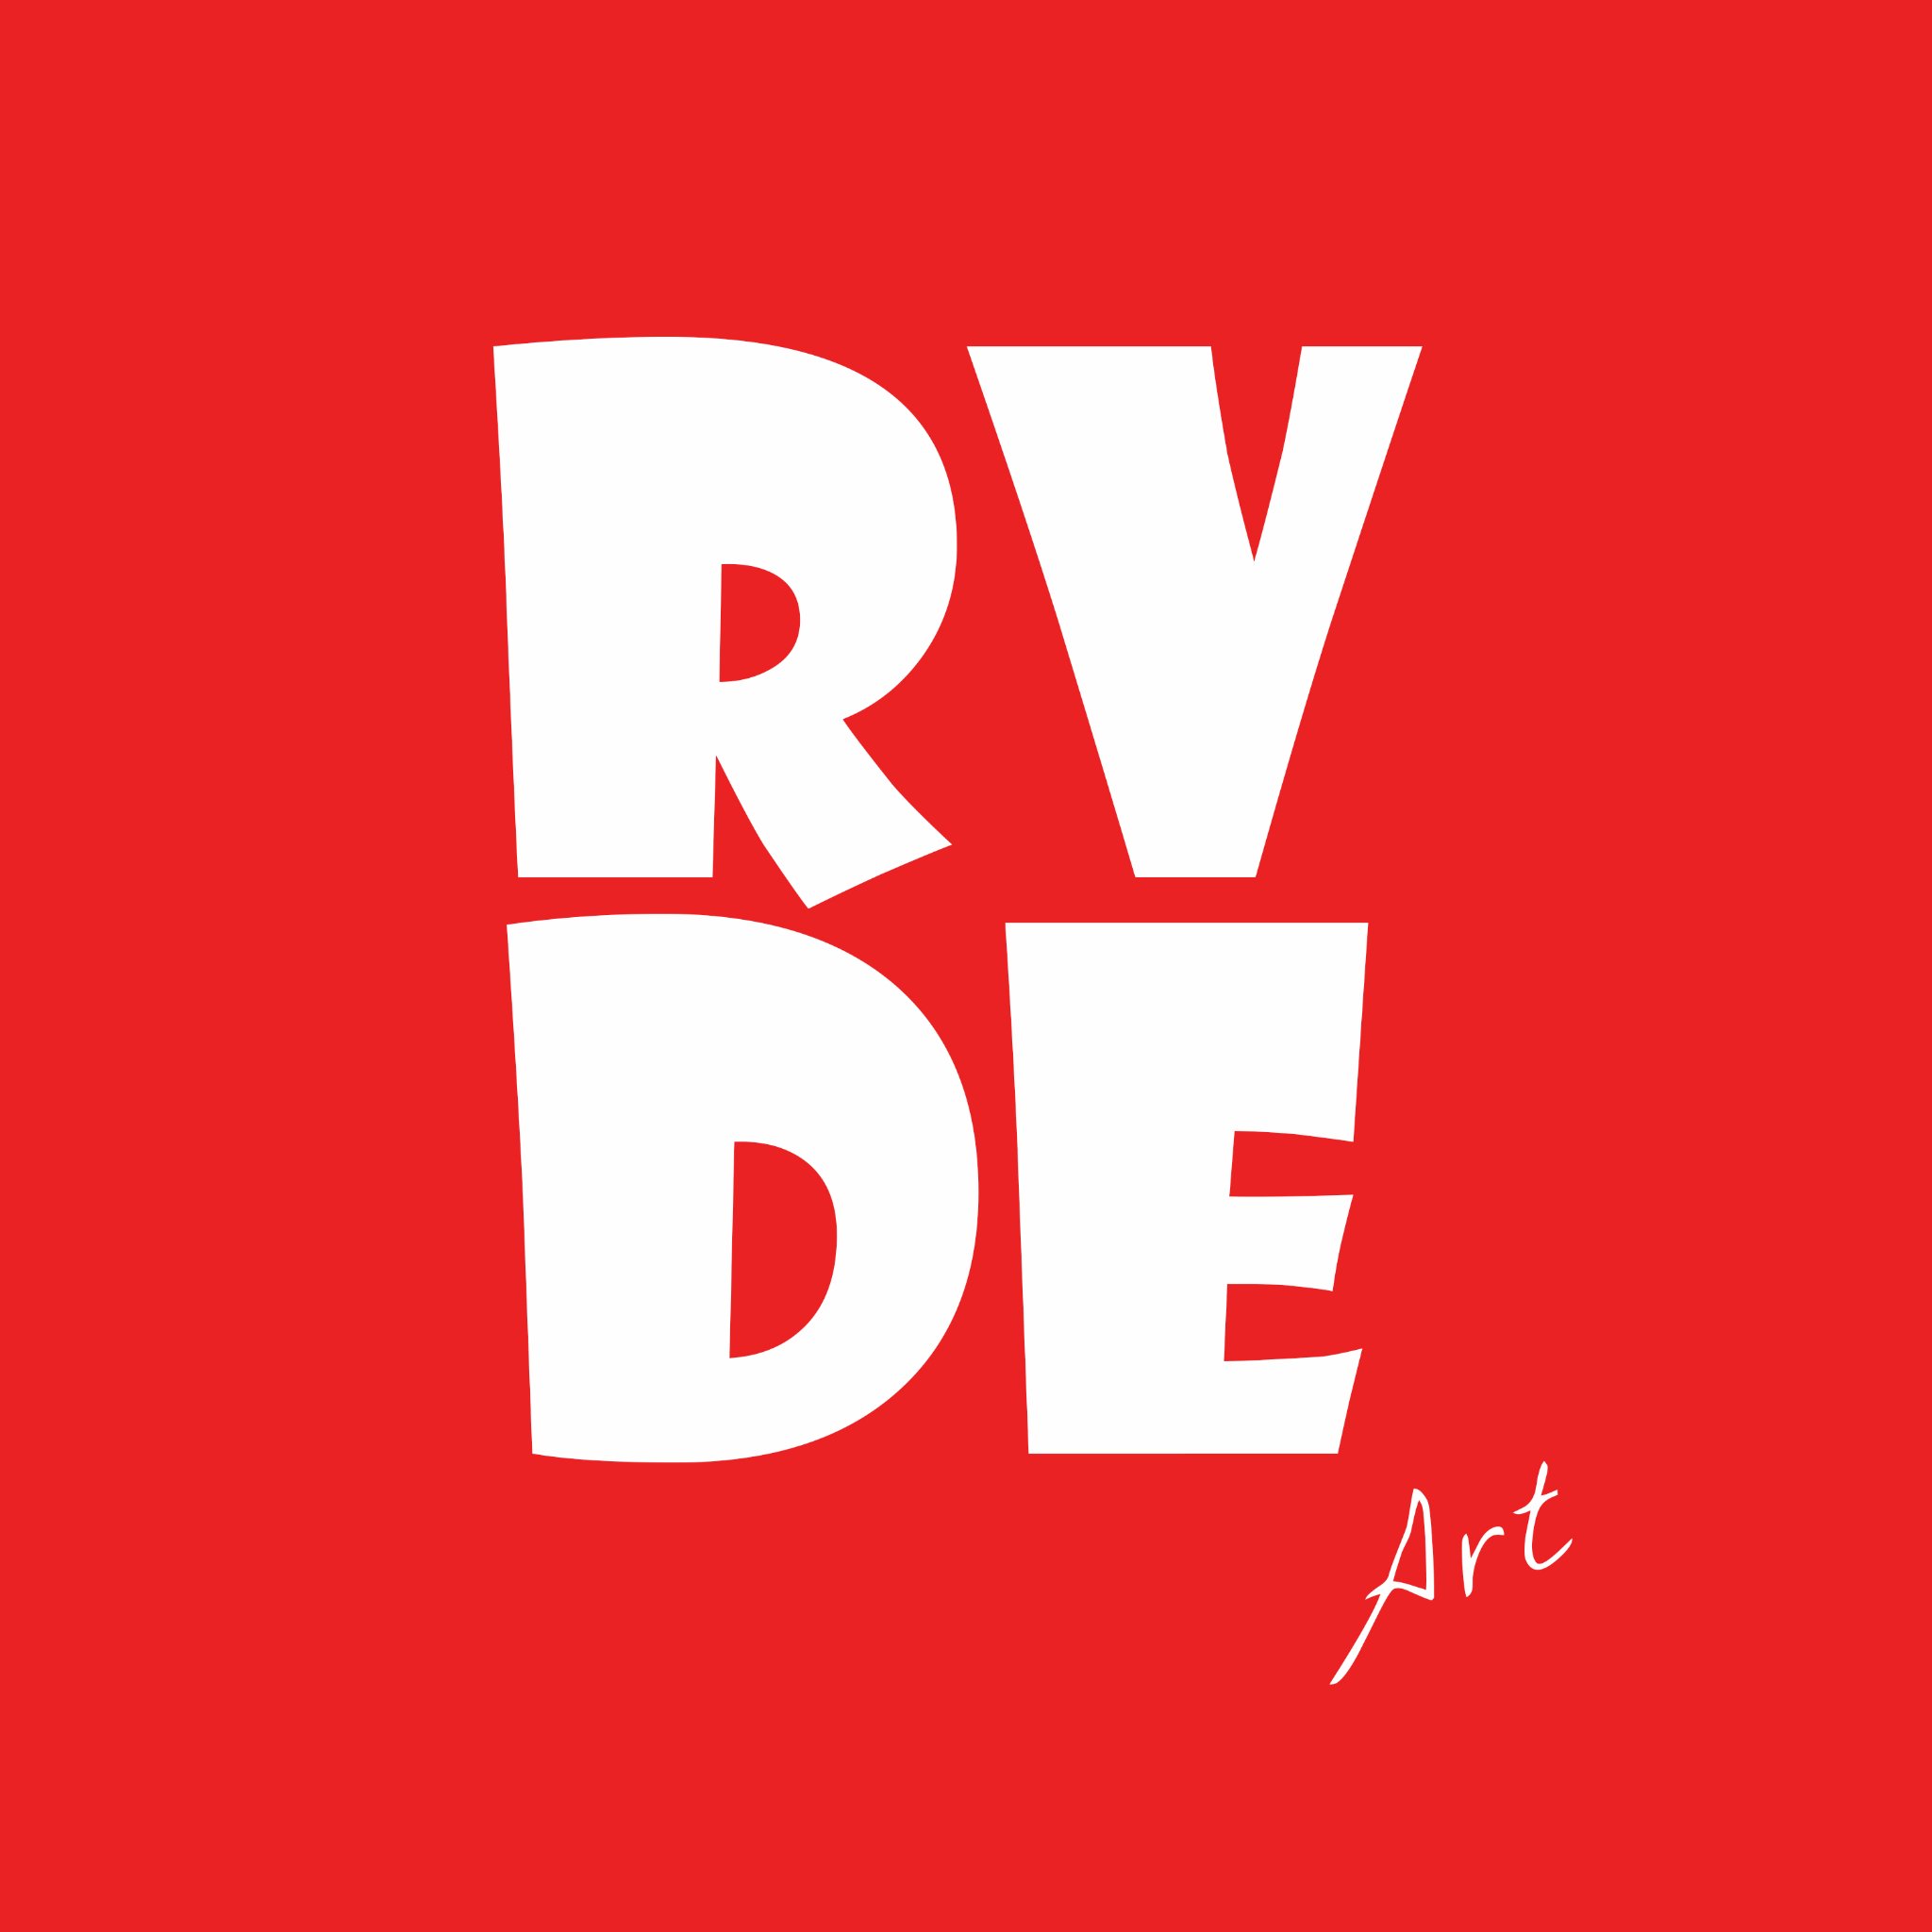 RvdeArt is a Jamaican-based agency that provides Social media management, Graphic Designs, illustrations and Motion designs.